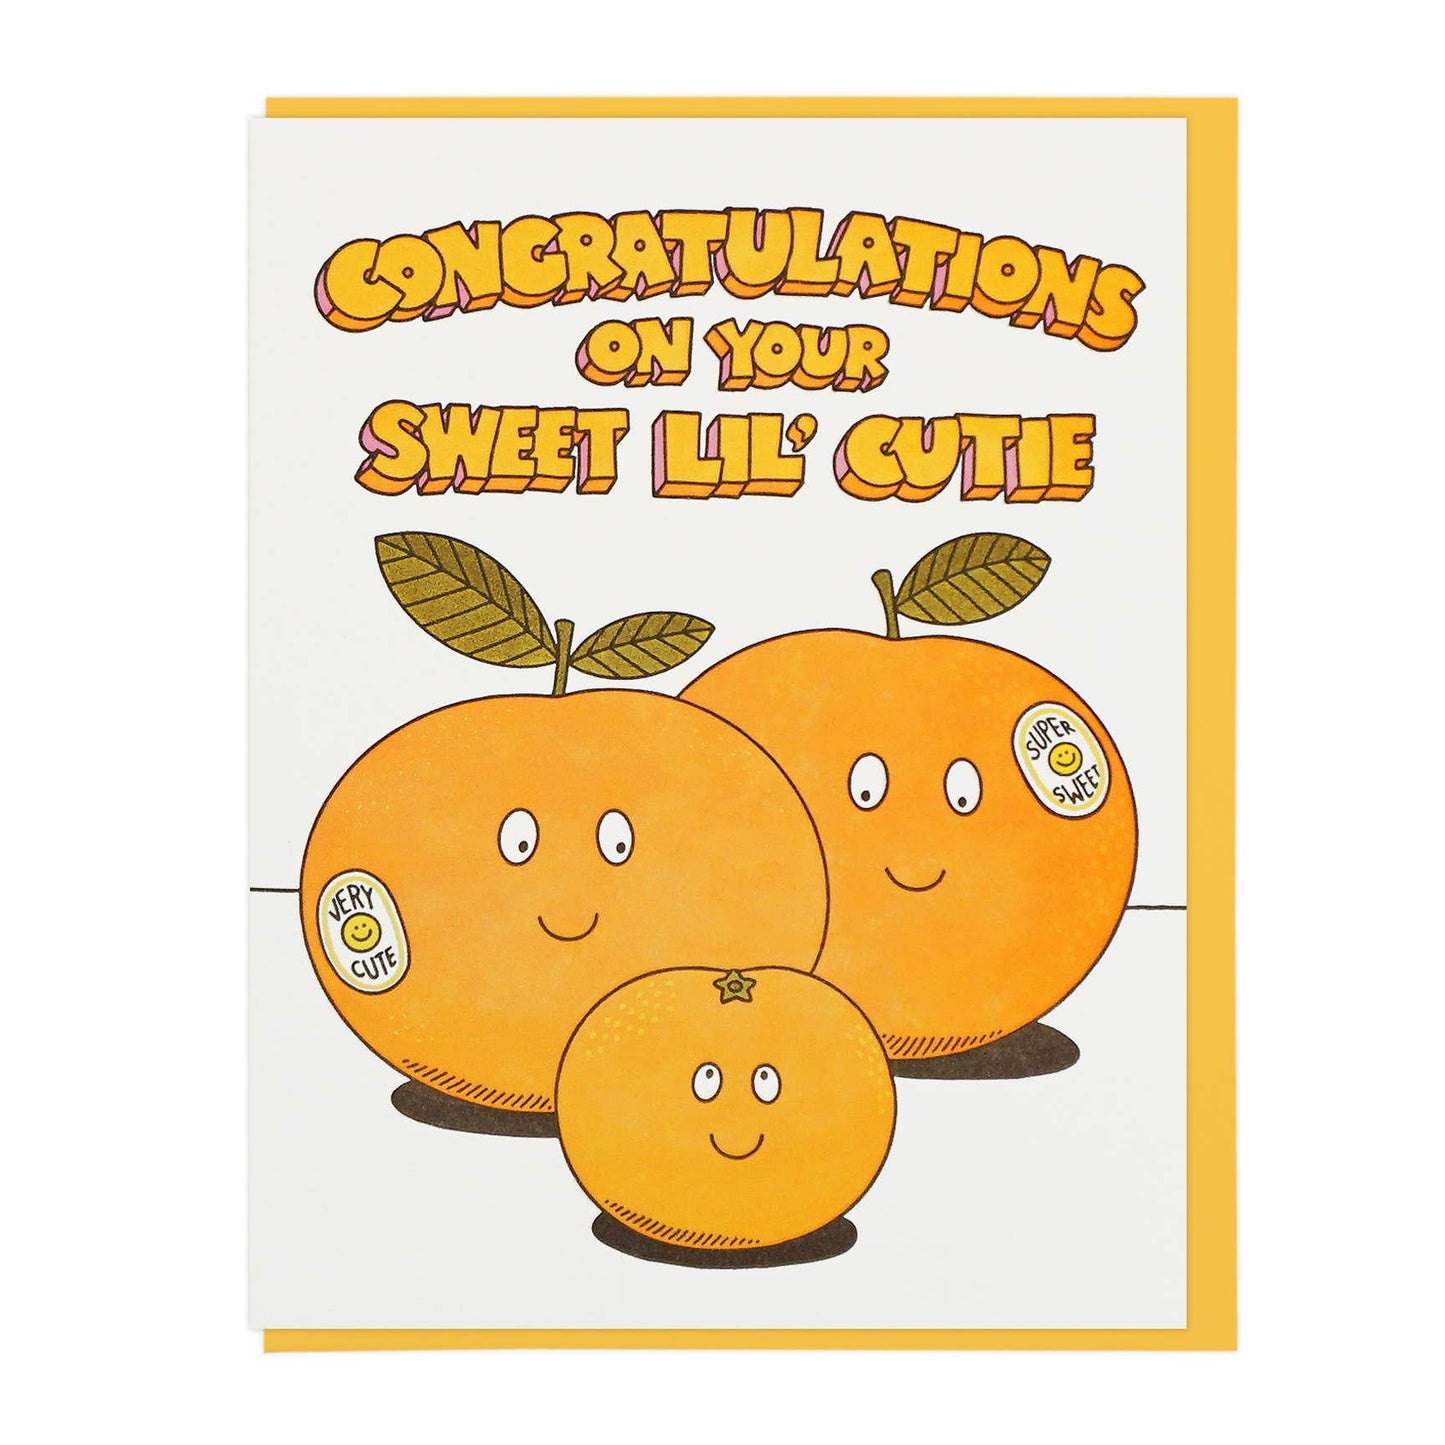 tangerine-cutie-oranges-greeting card -- reads "Congratulations on your sweet lil' cutie" 